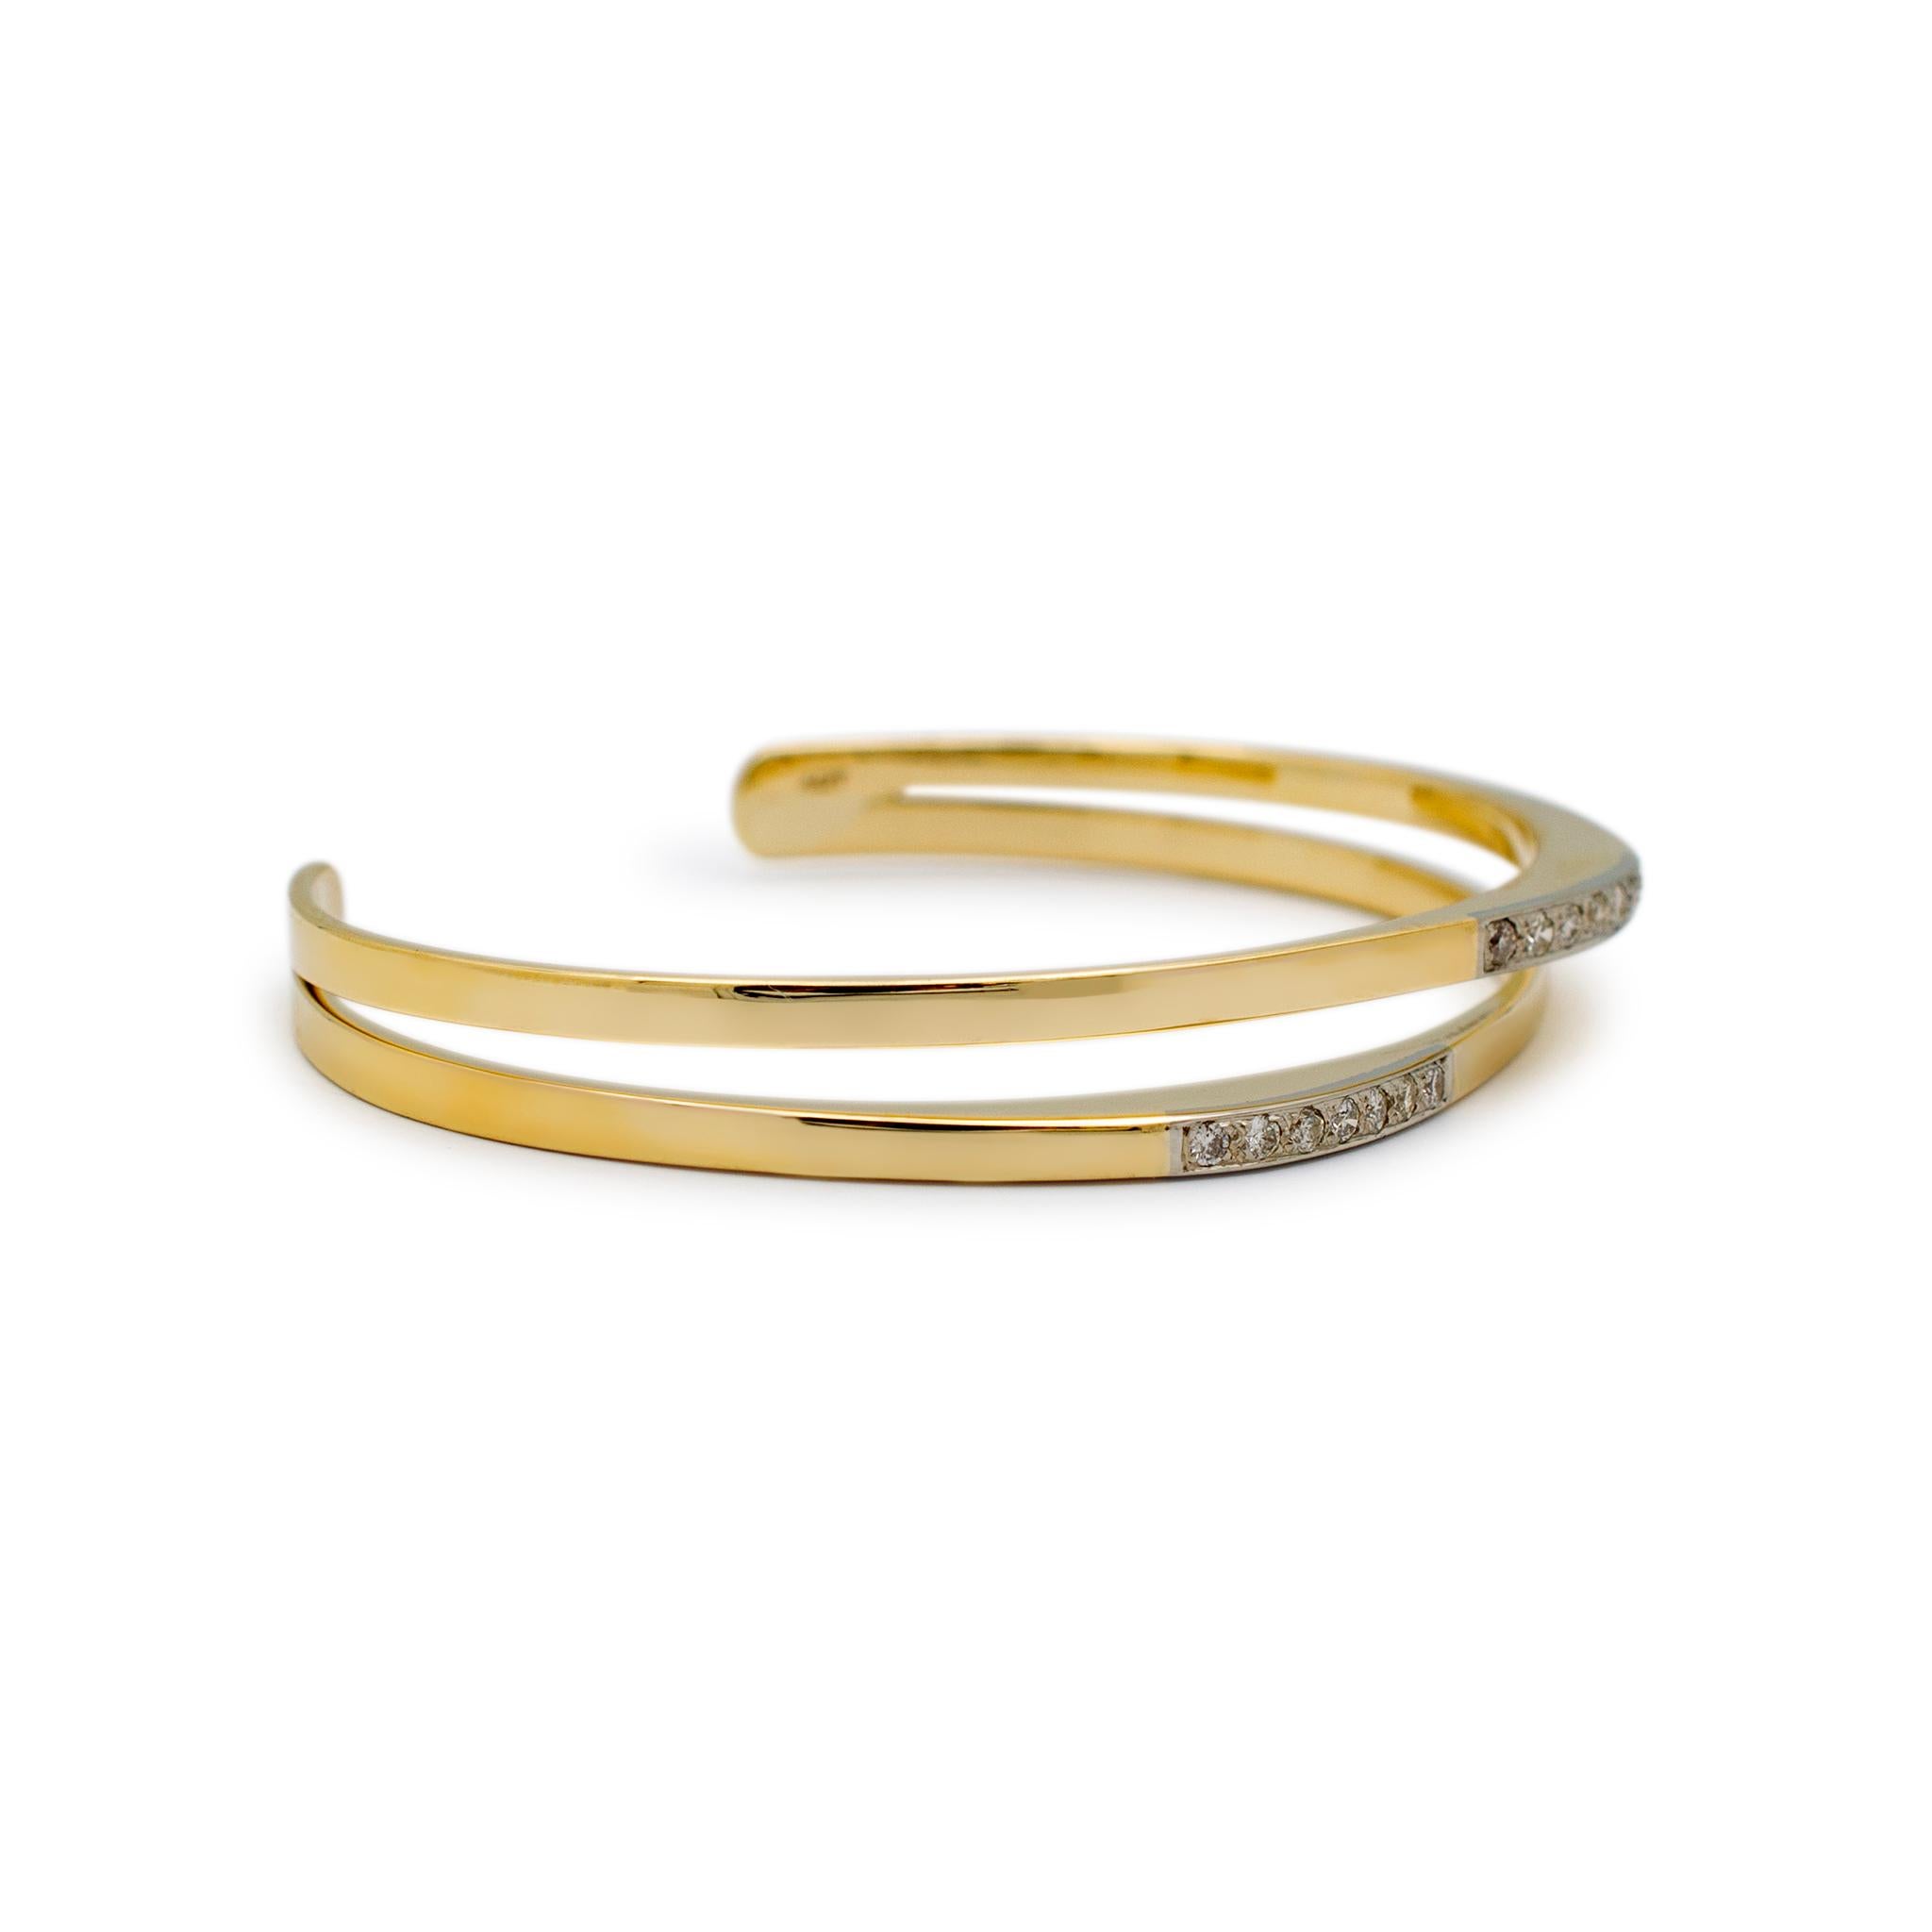 Gender: Ladies

Metal Type: 14K Yellow Gold

Length: 6.25 inches

Width: 7.35 mm

Weight: 17.00 grams

Ladies custom-made polished 14K yellow gold, diamond vintage cuff, bangle bracelet. Engraved with 